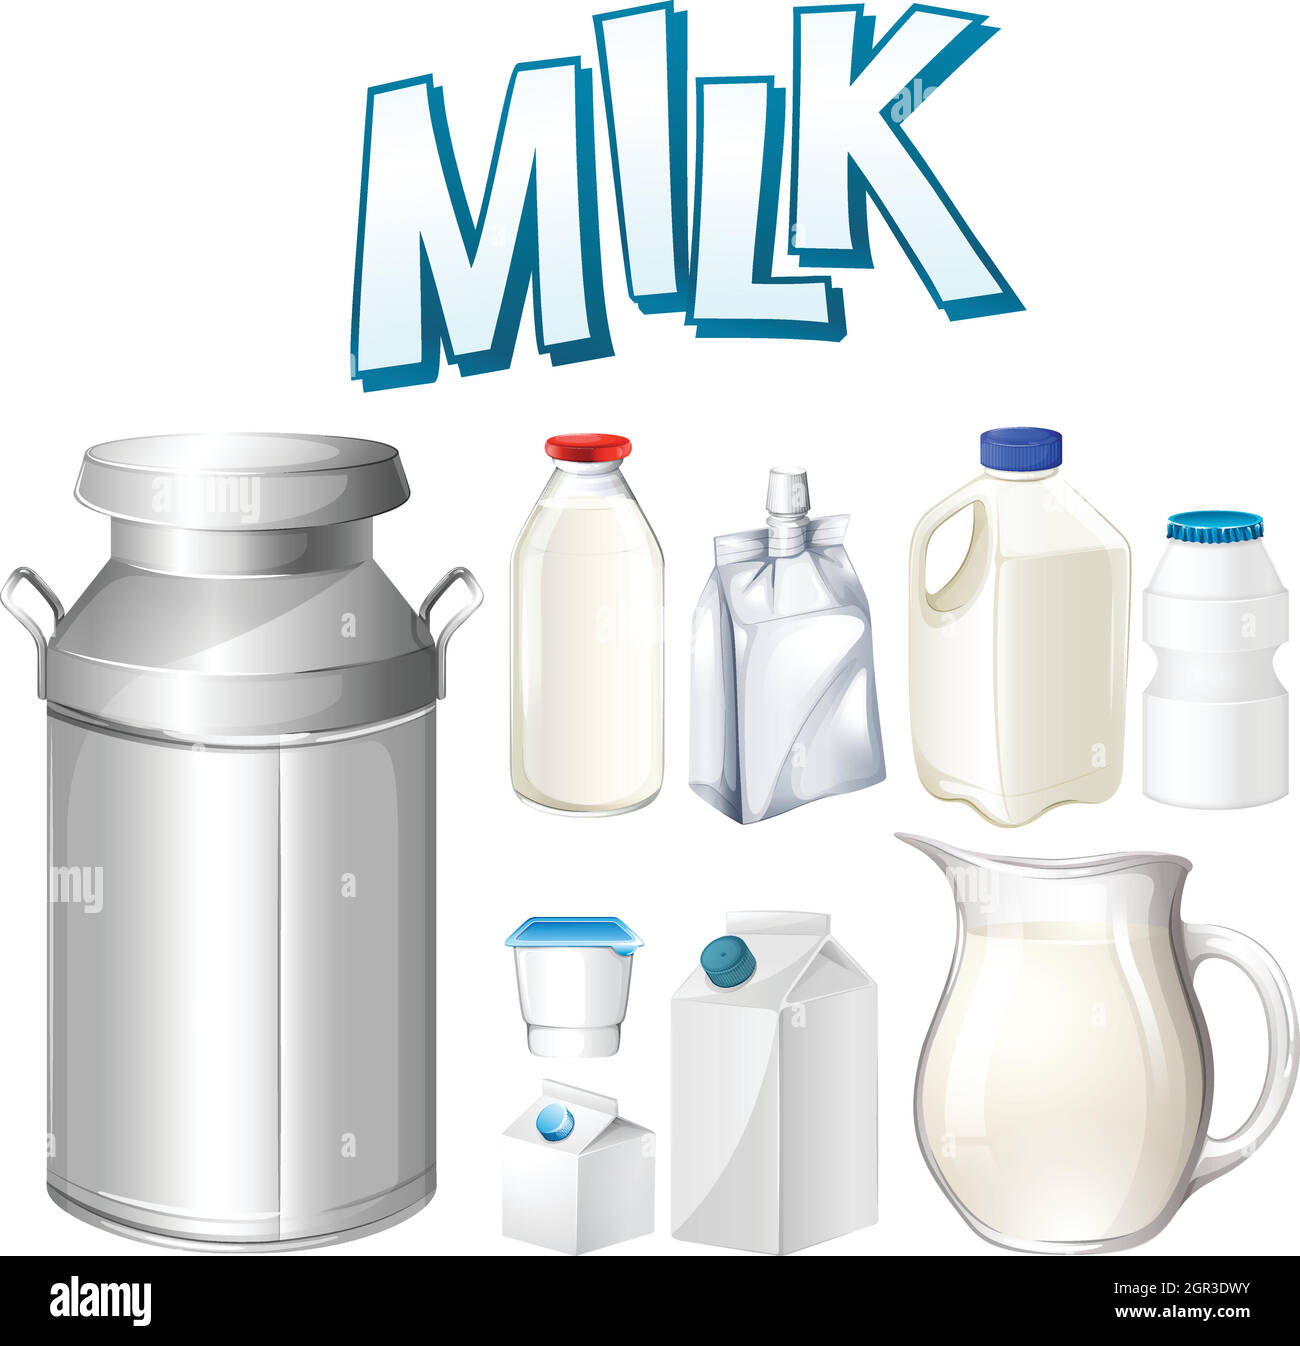 Different set of containers for milk Royalty Free Vector